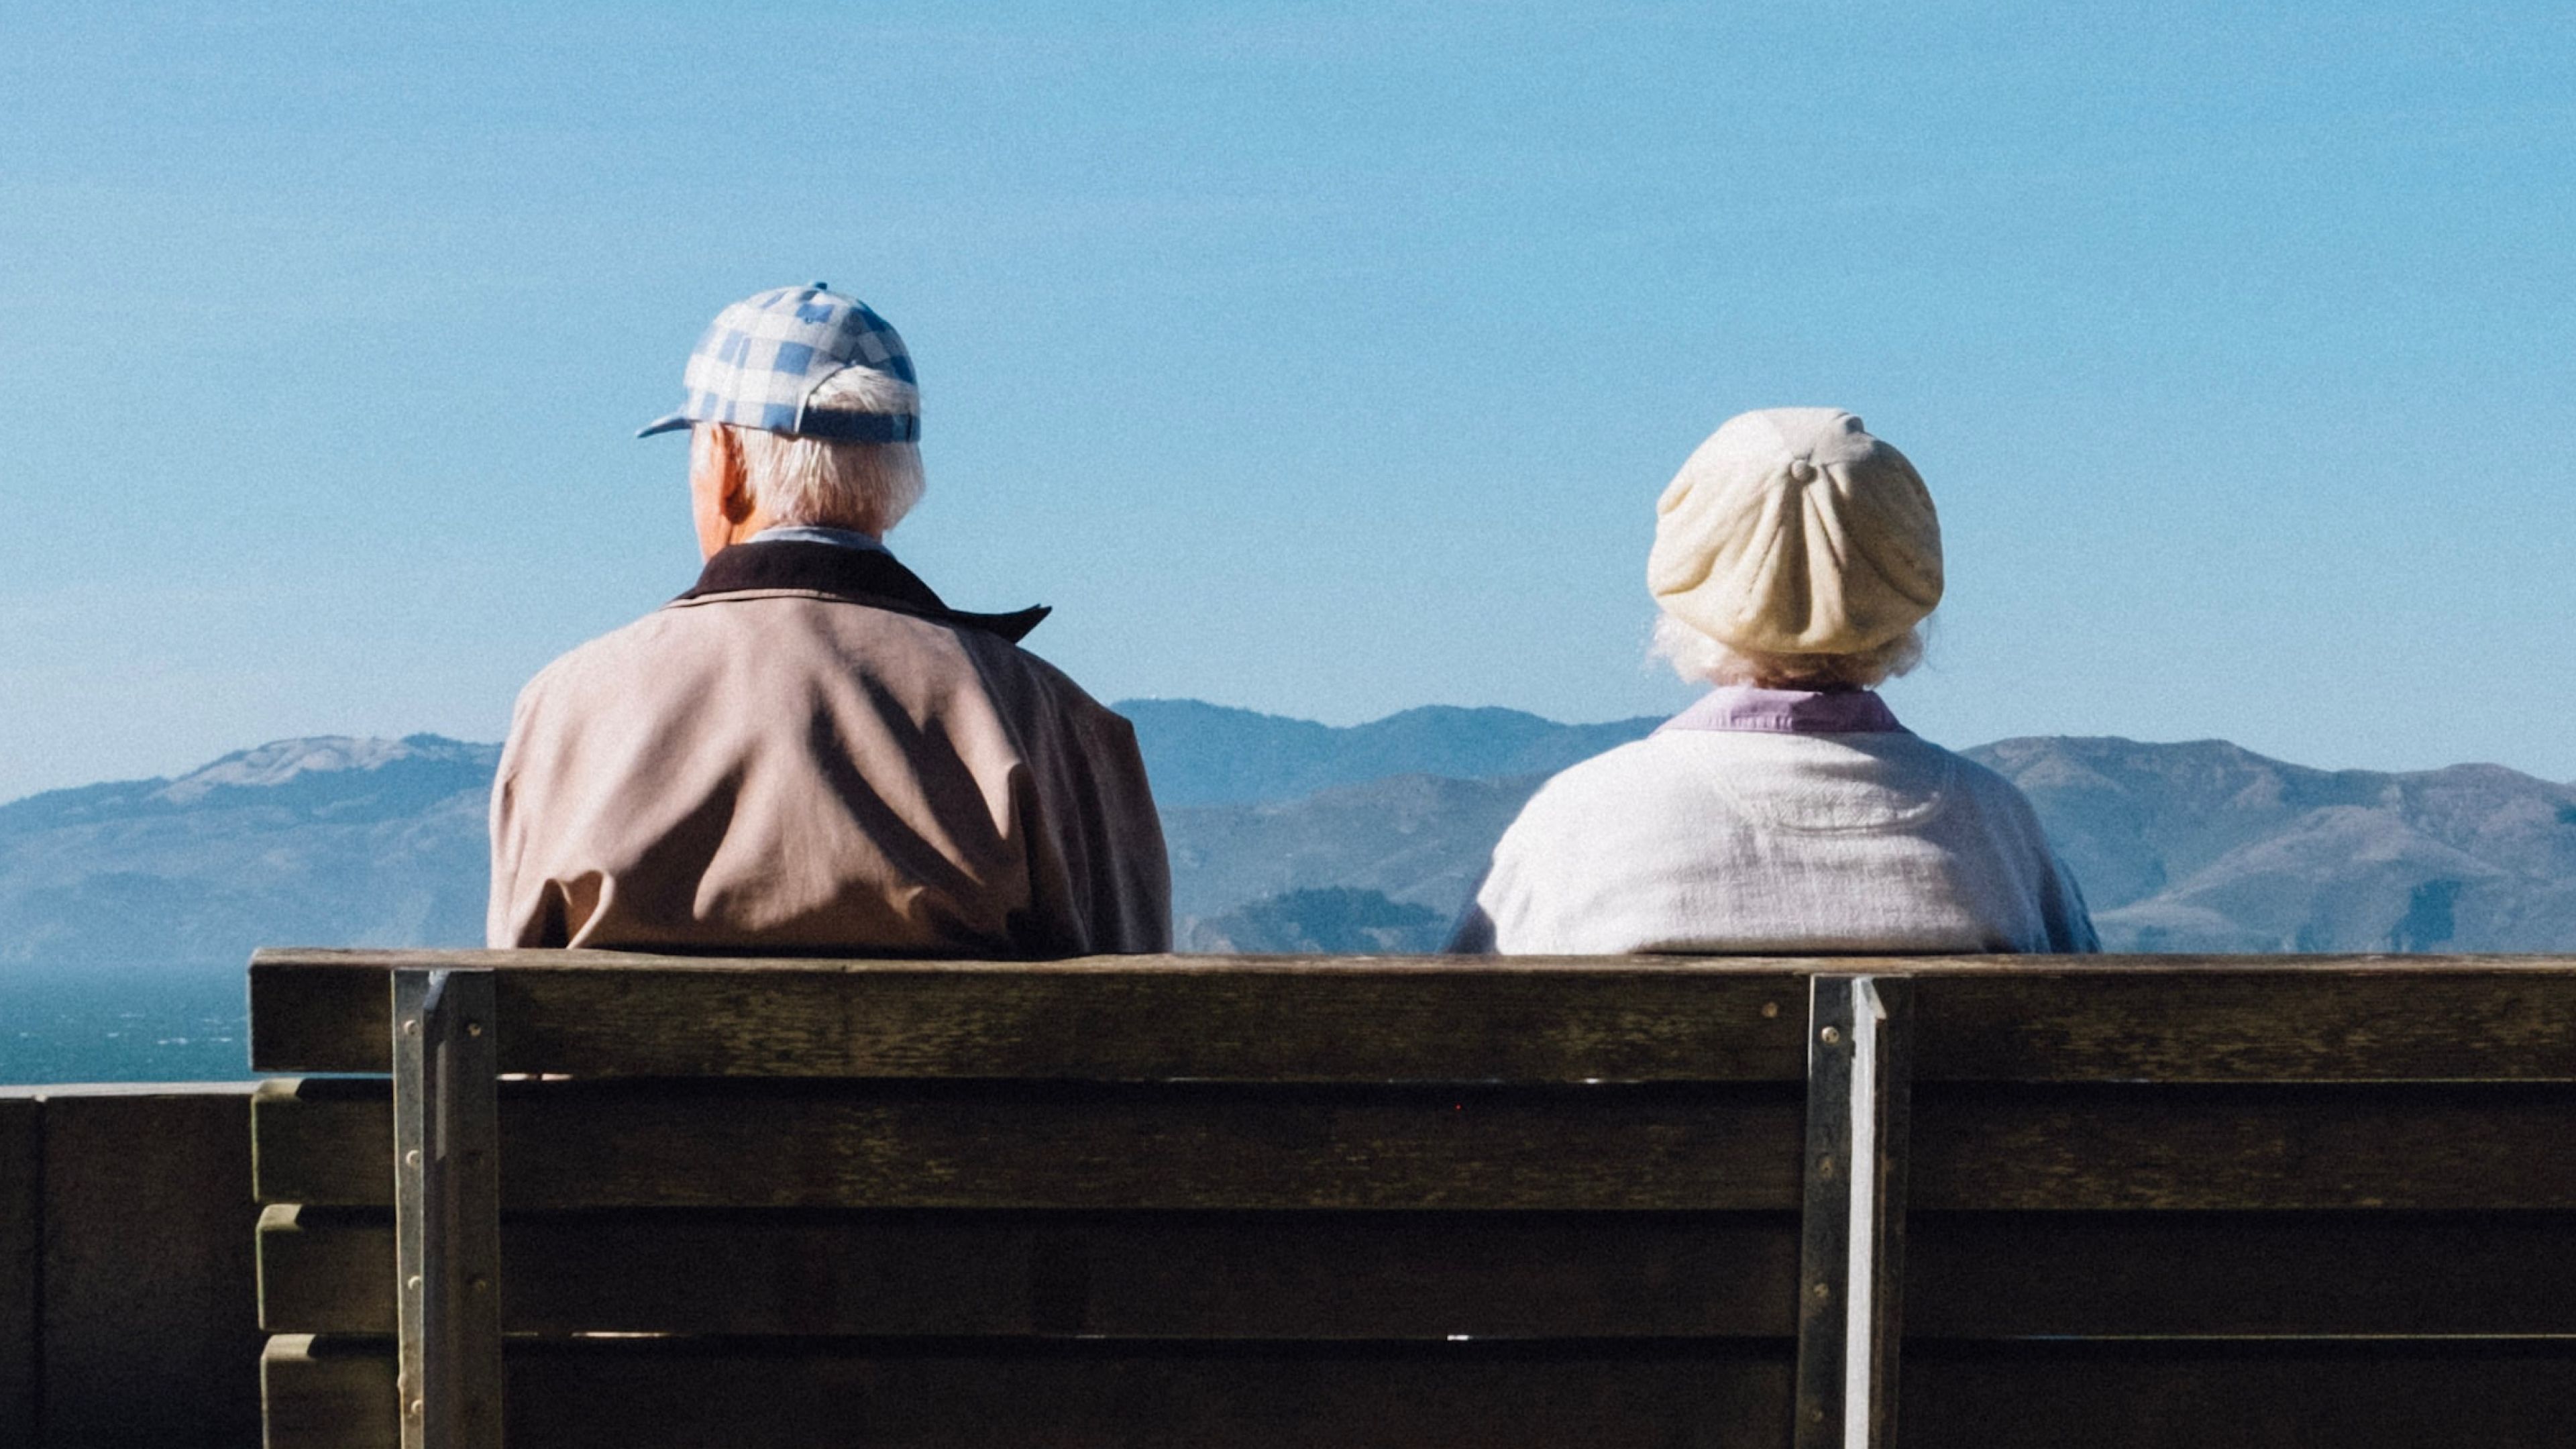 The backs of an older woman and man as they sit on a bench taking in the views of mountains.  